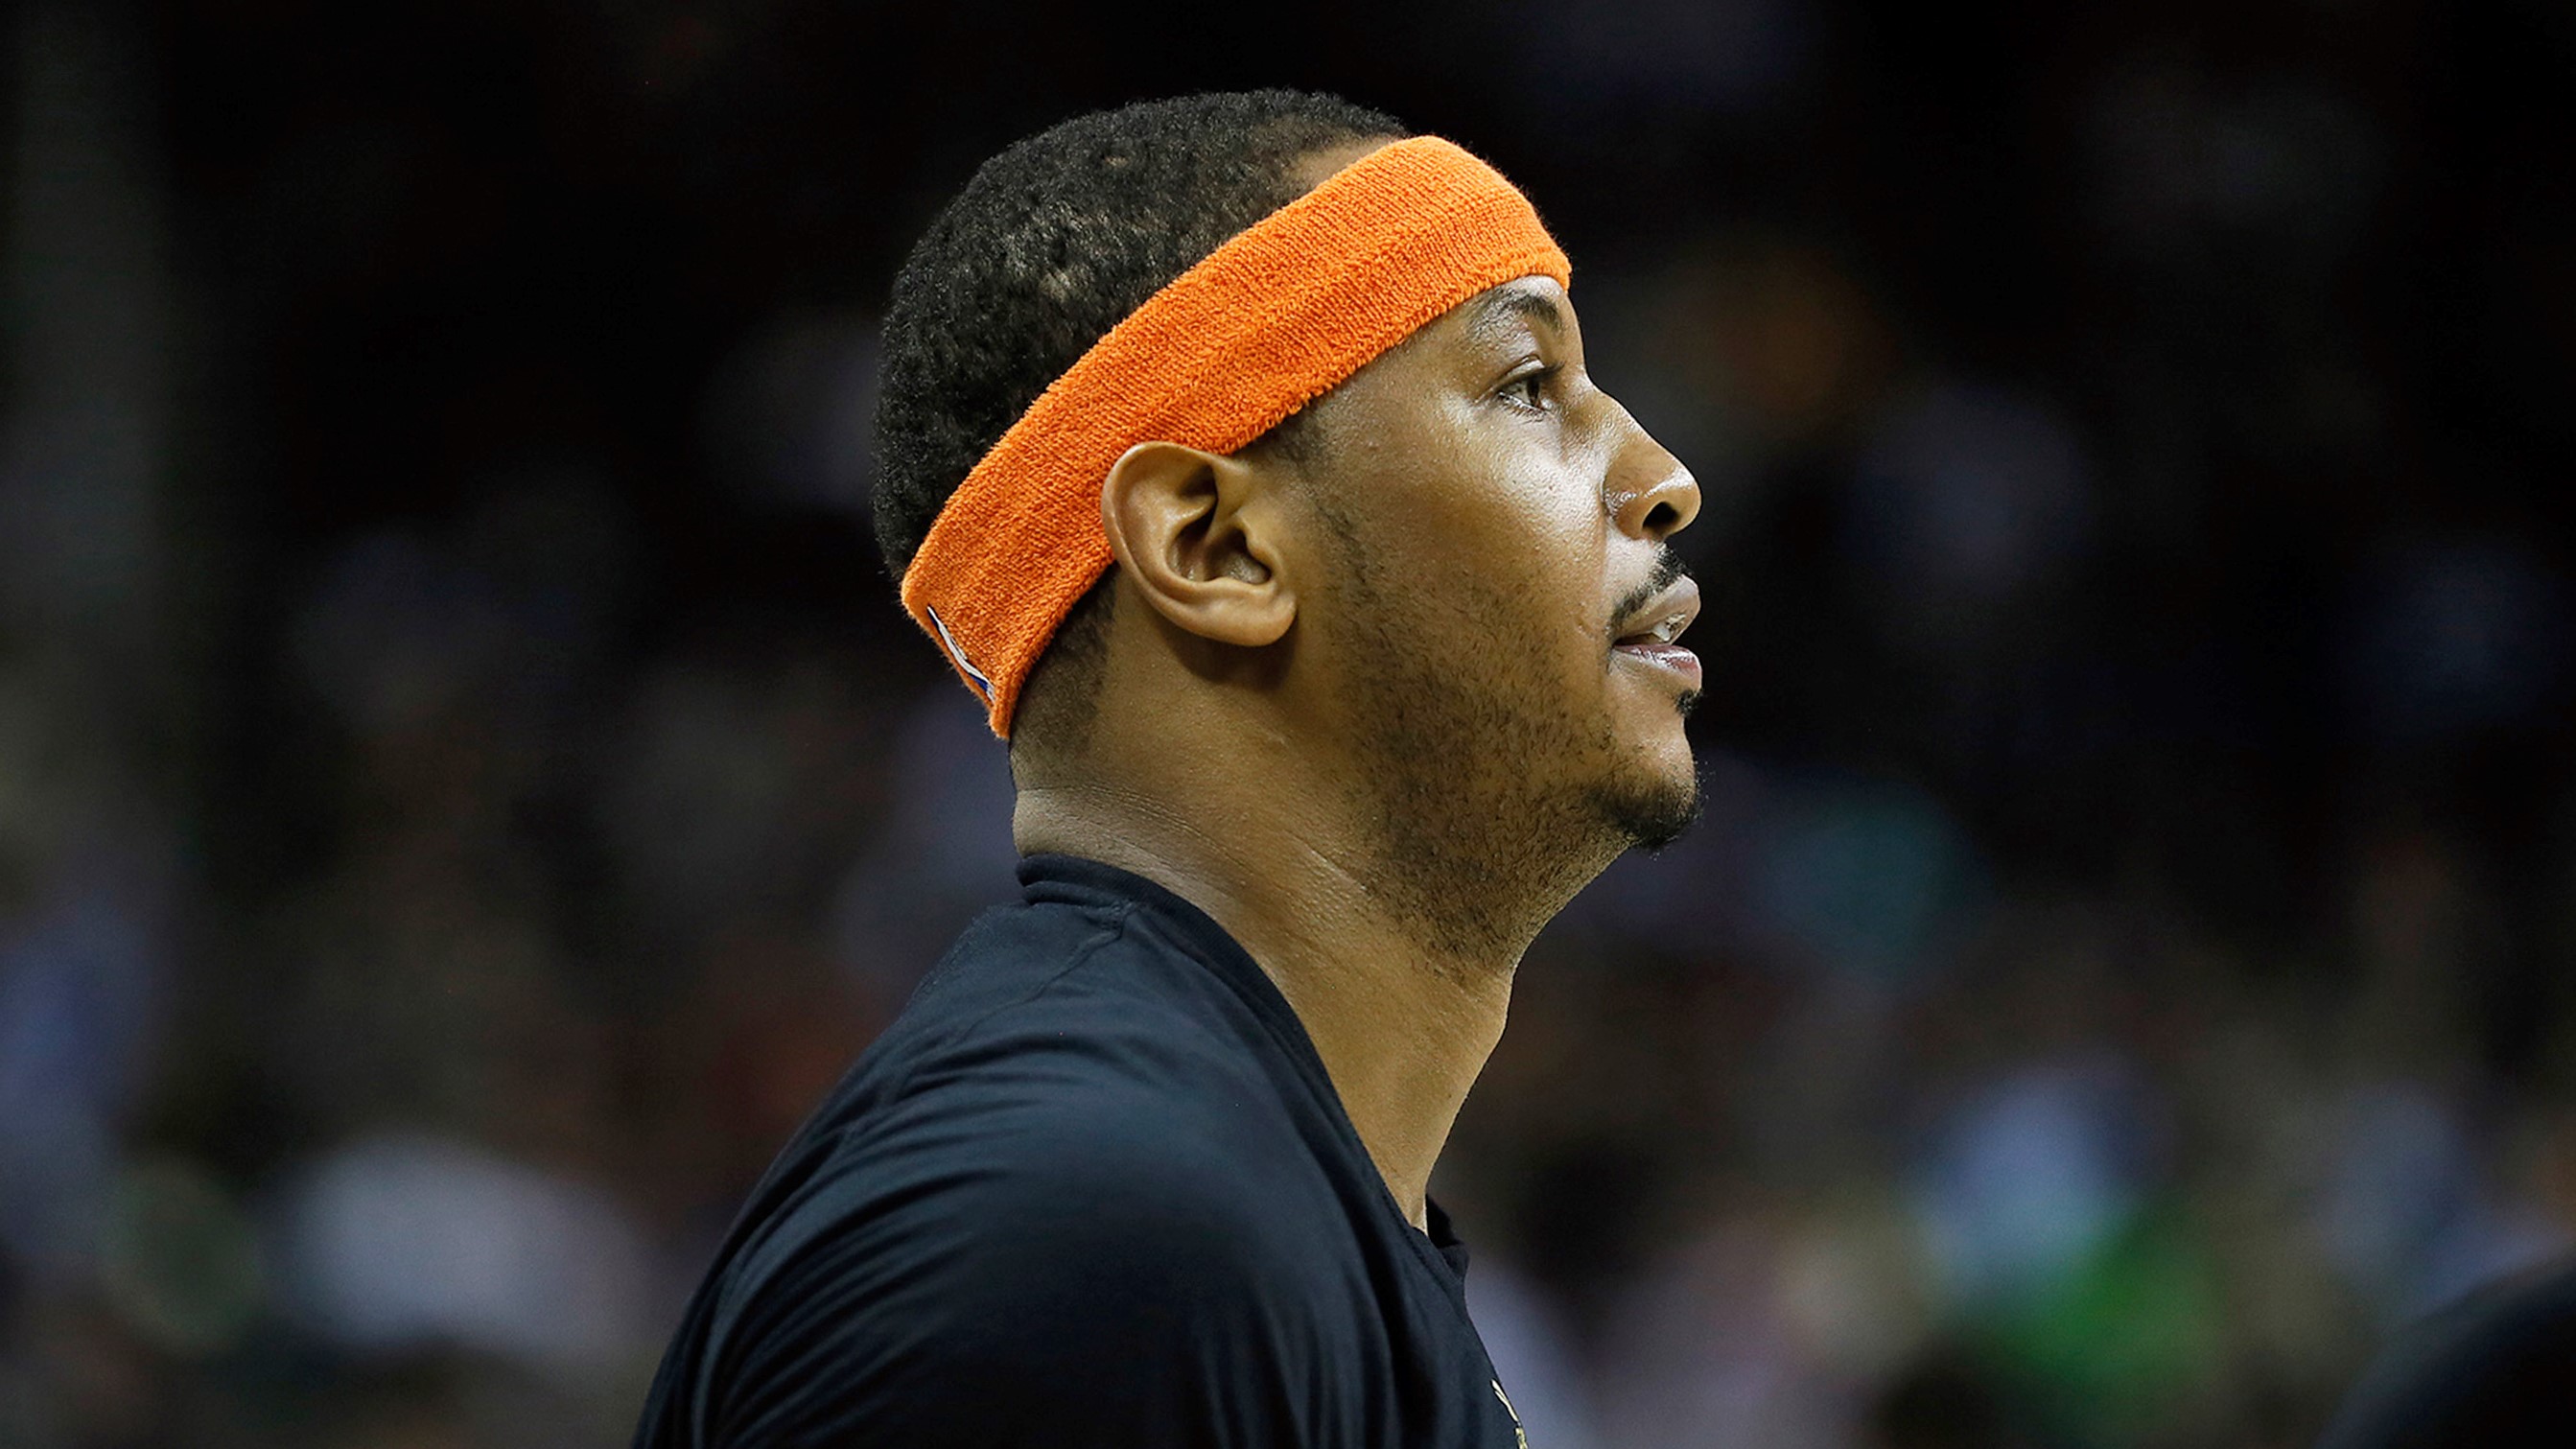 Carmelo Anthony Speaks On Being Bought Out & Tenure On The Thunder